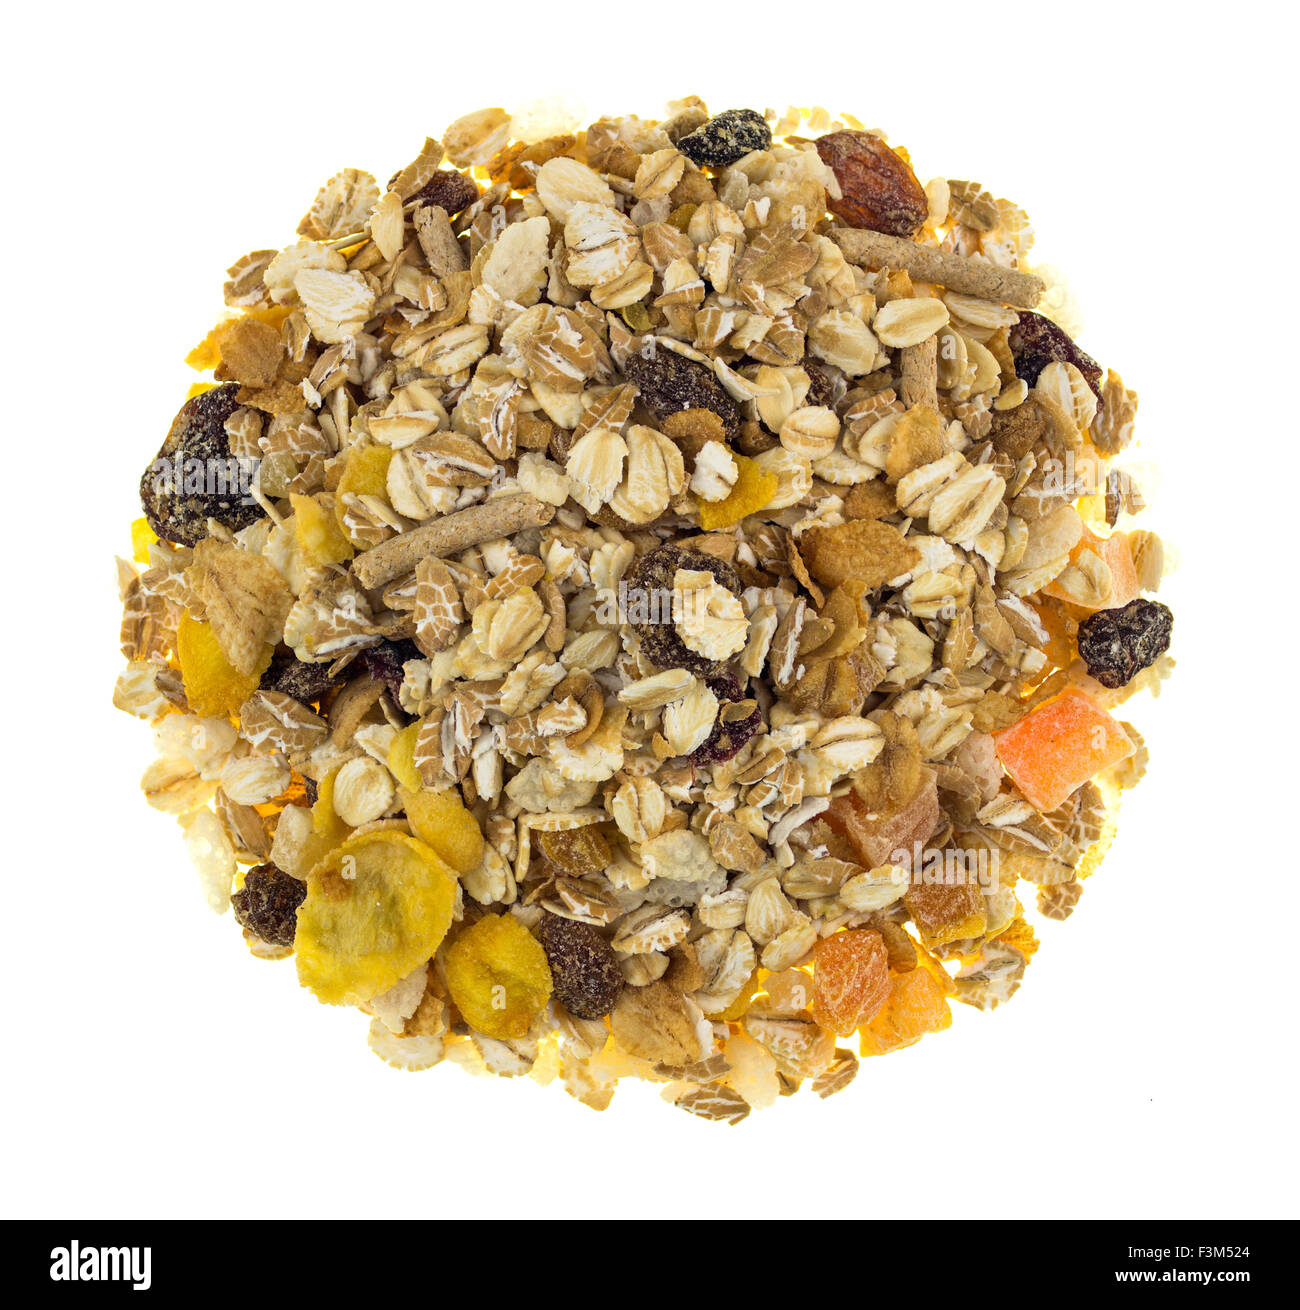 Mixed muesli in a circle shaped pile isolated against a white backgound Stock Photo